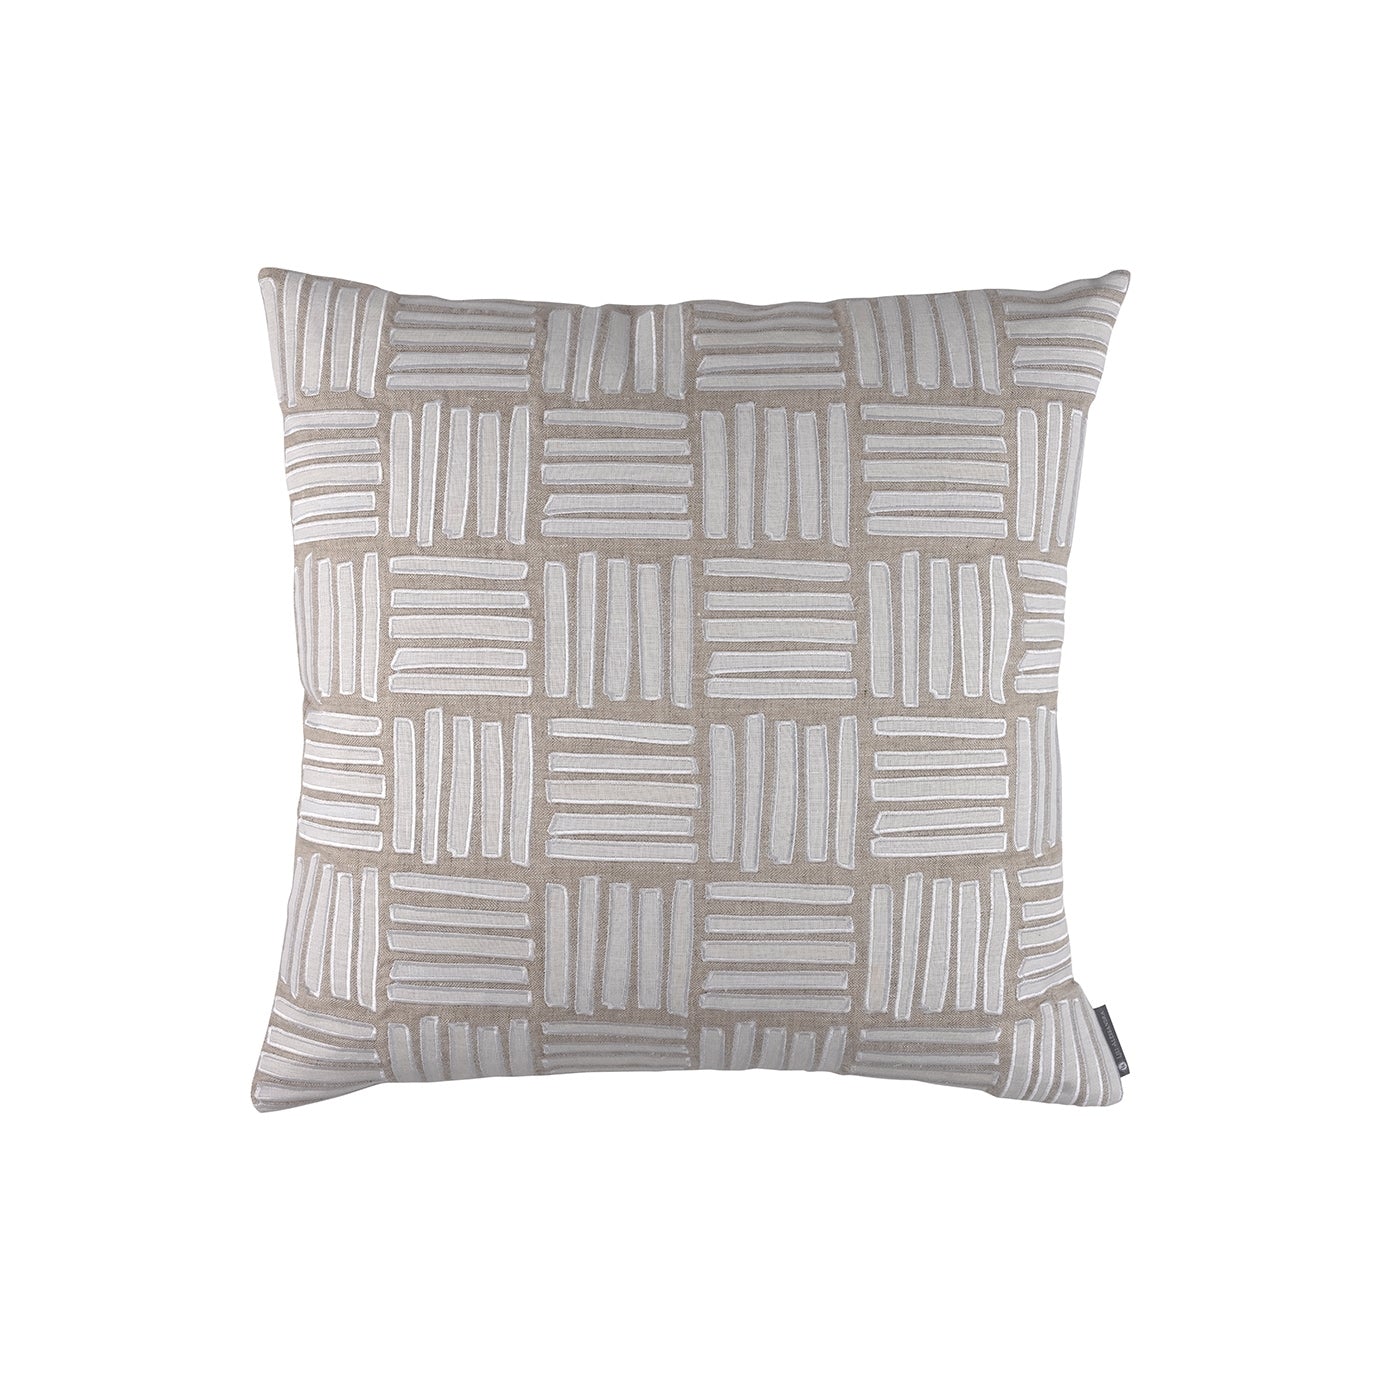 Aspen Natural & White Pillow by Lili Alessandra | Fig Linens